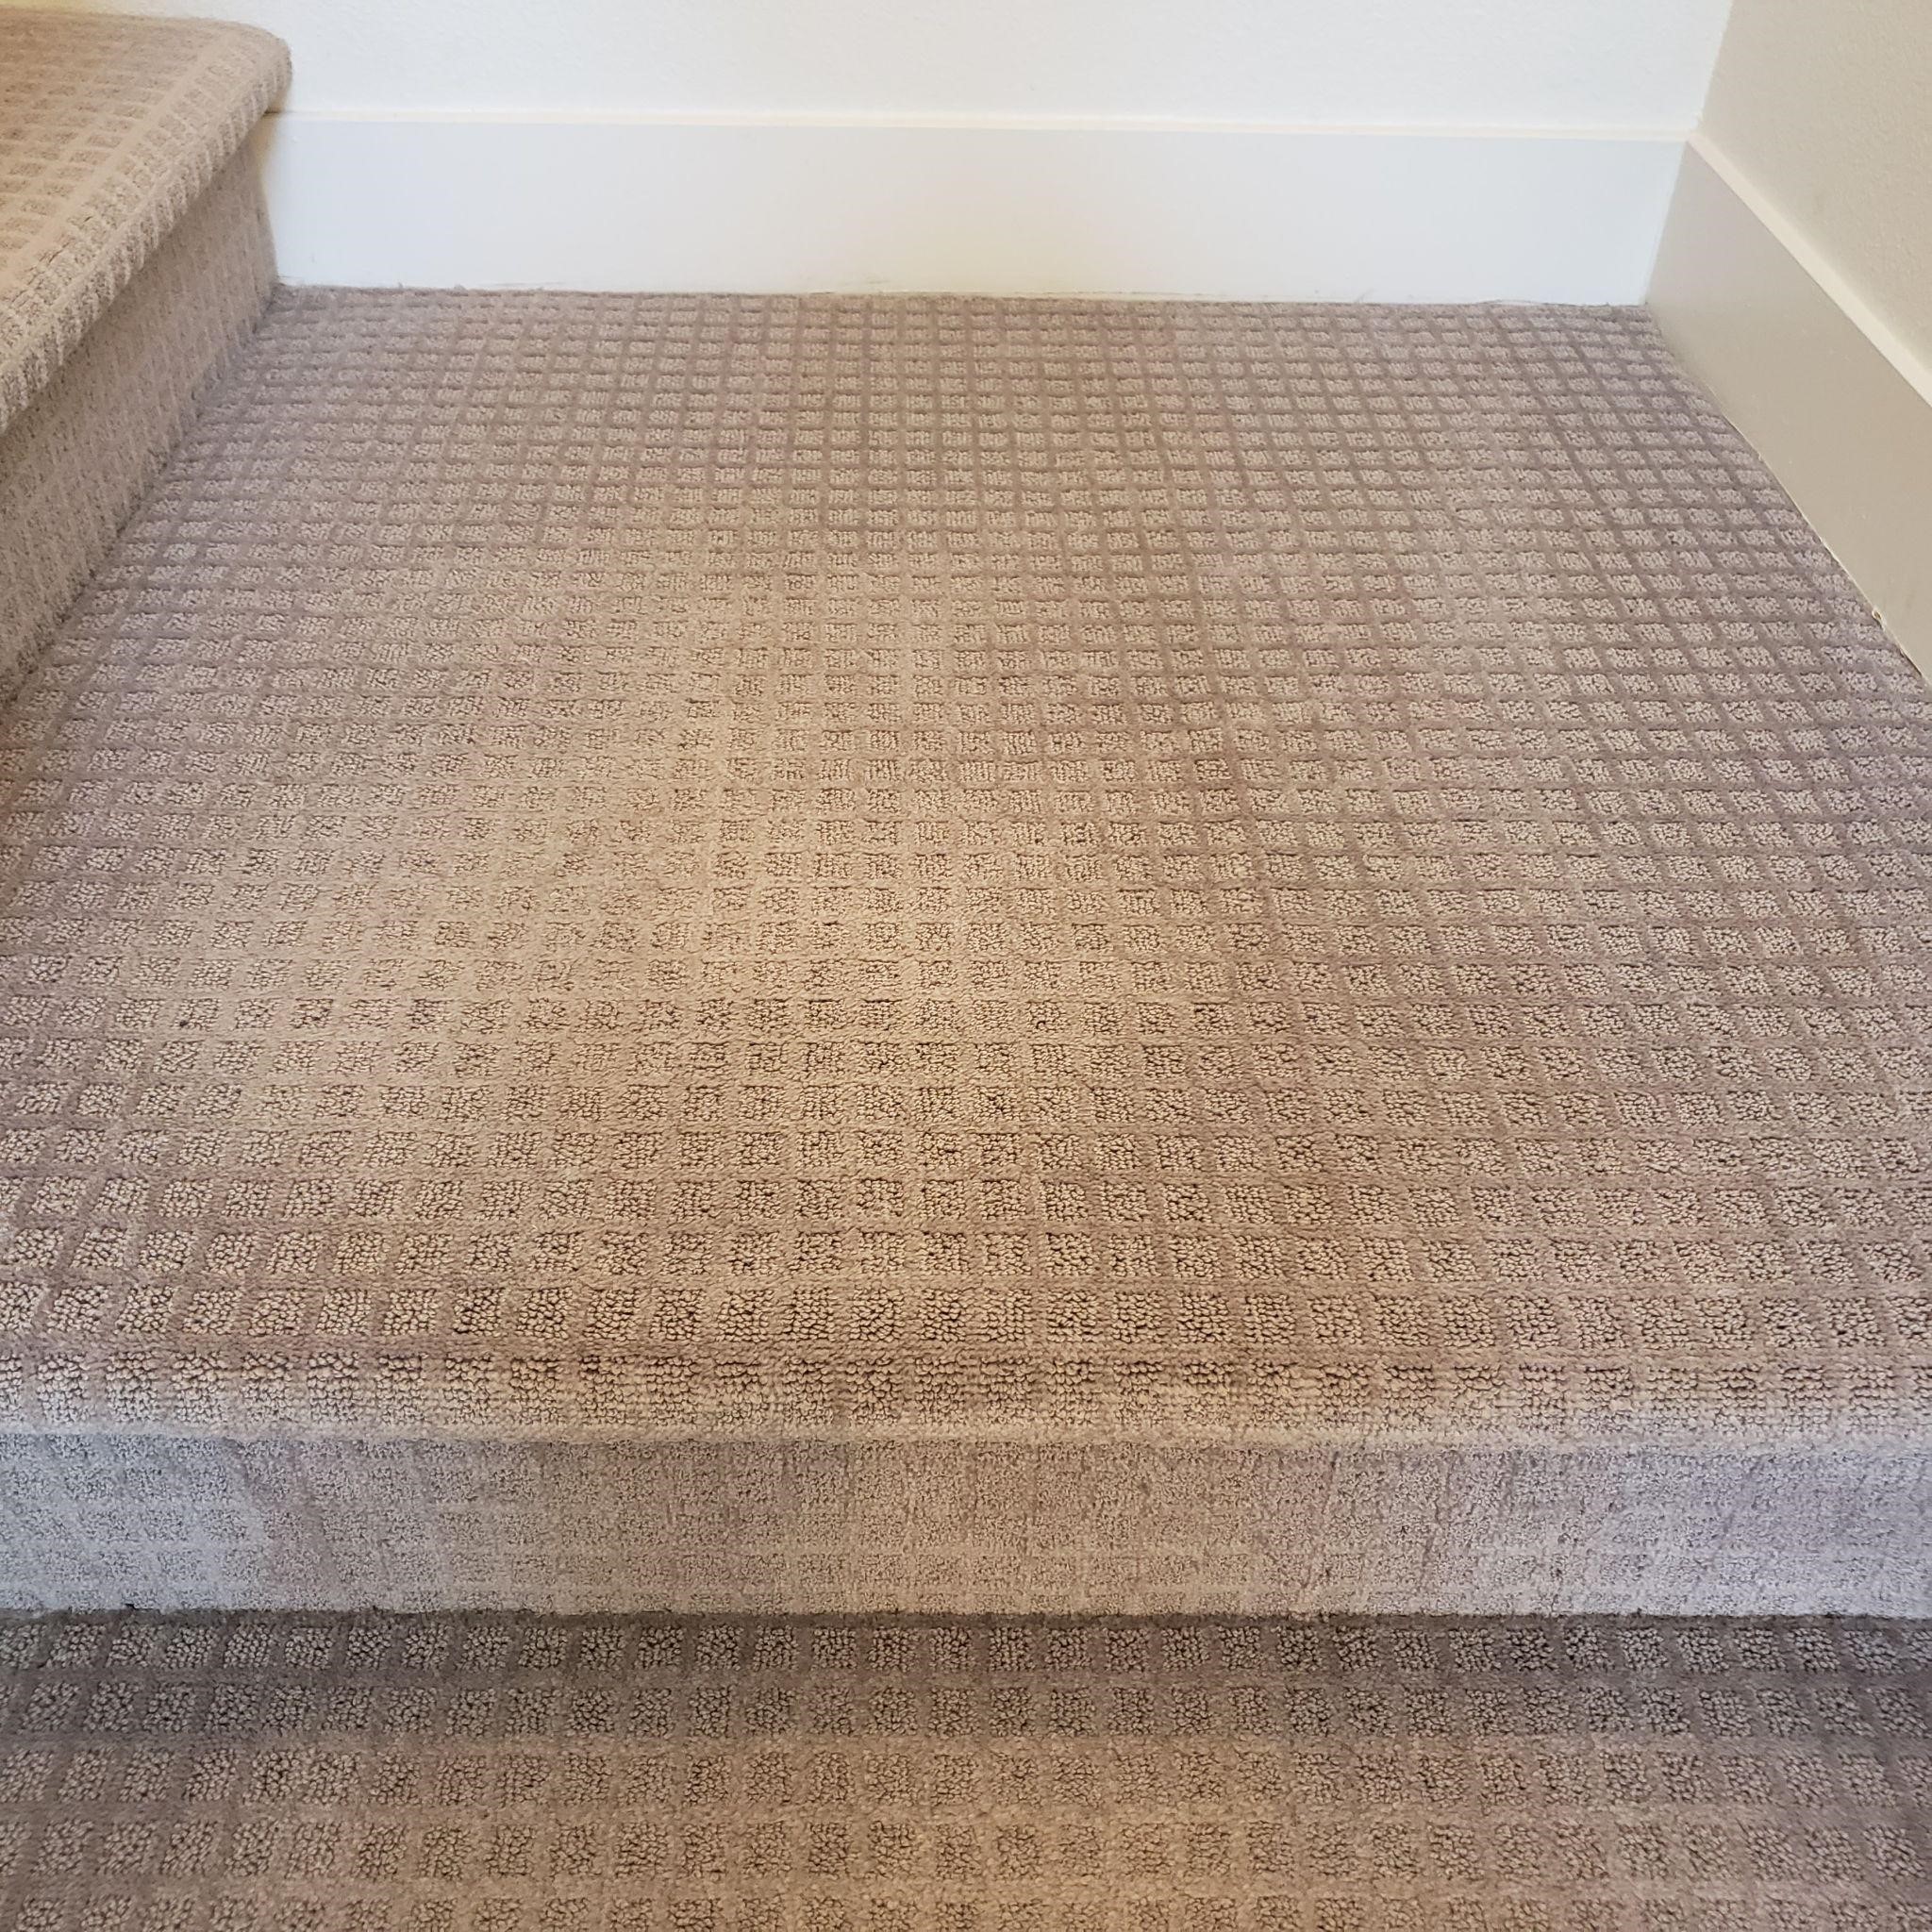 carpet cleaning before and after photos